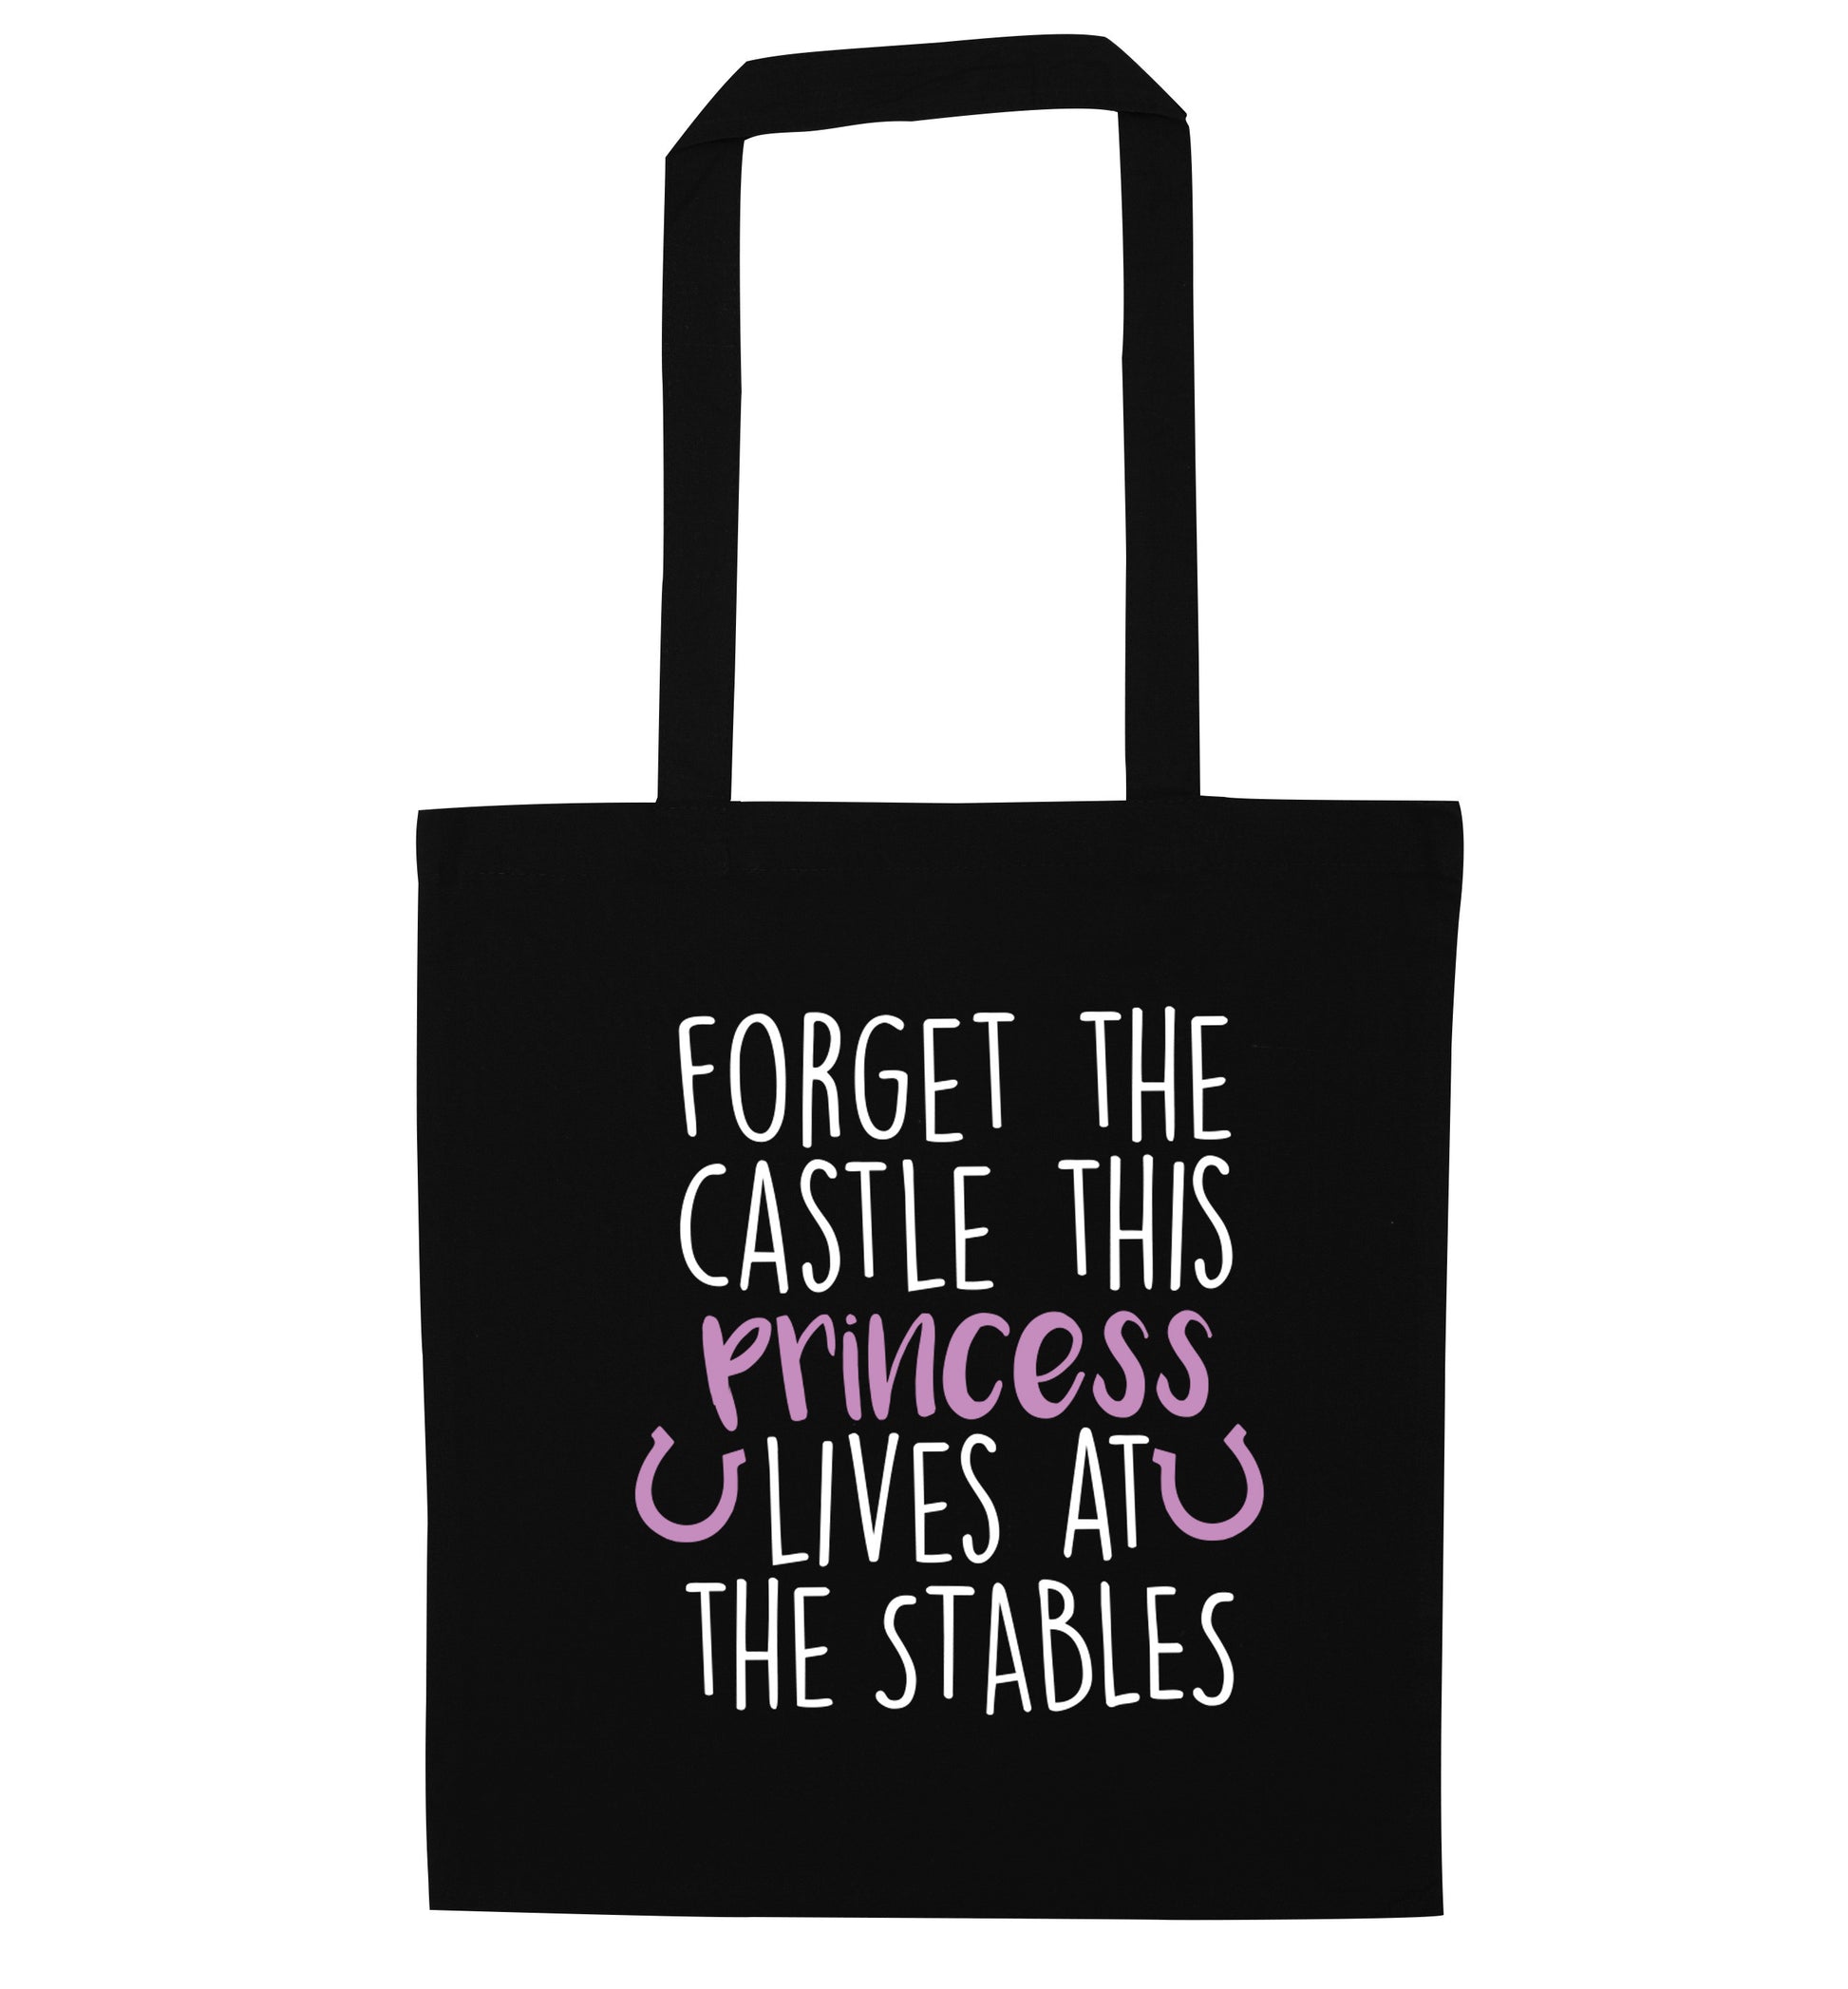 Forget the castle this princess lives at the stables black tote bag